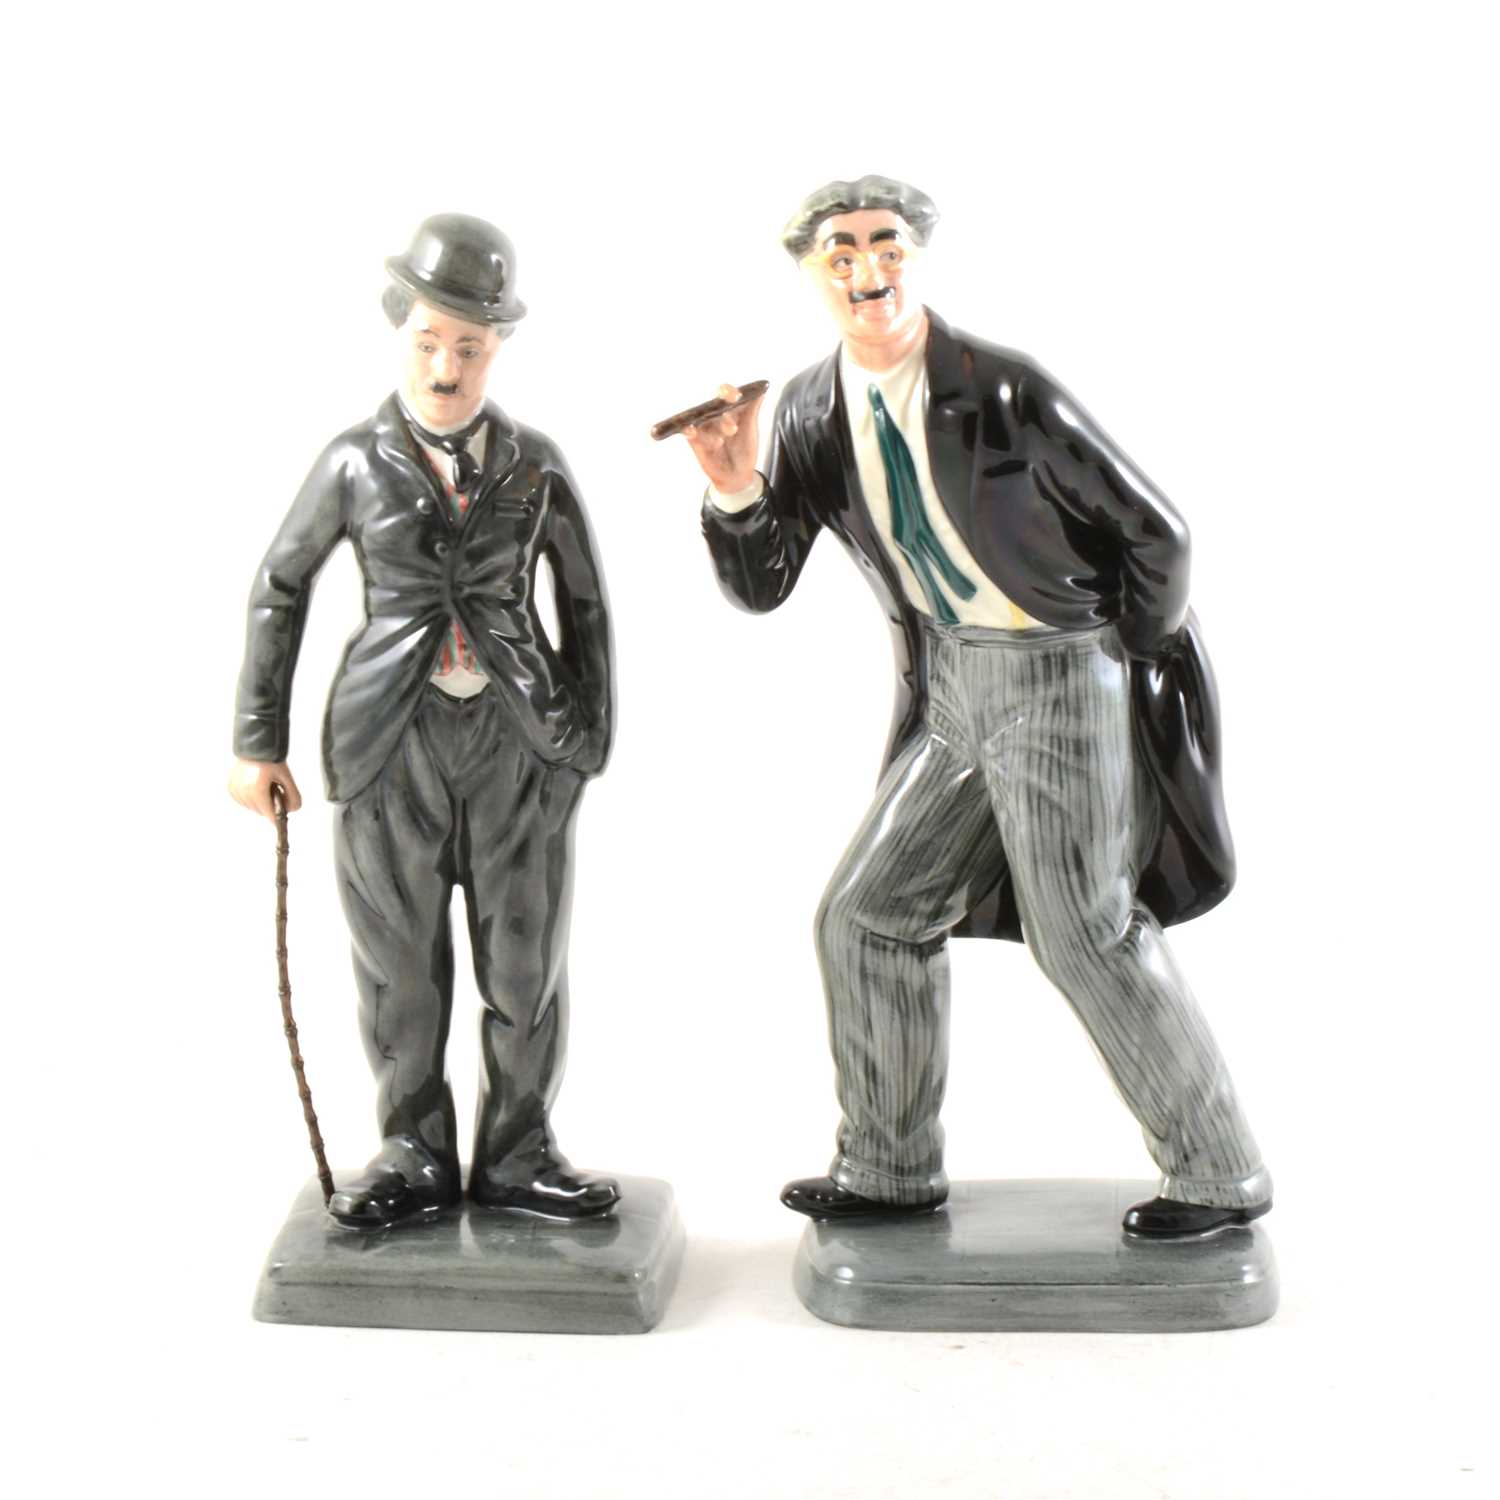 Lot 83 - Royal Doulton "Charlie Chaplin" and "Groucho Marx", limited edition figures.